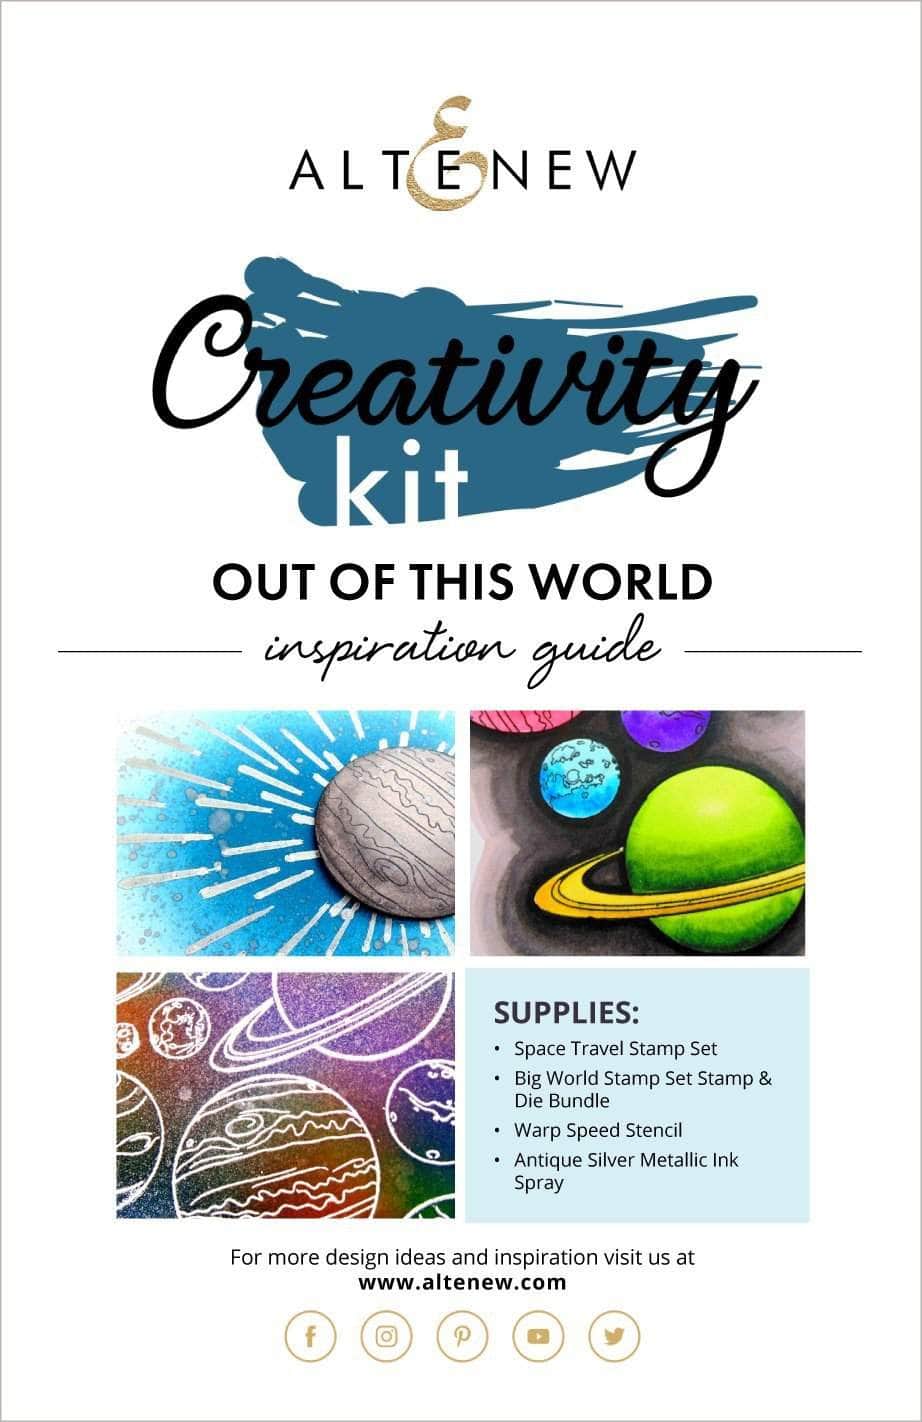 Printed Media Out of This World Creativity Kit Inspiration Guide